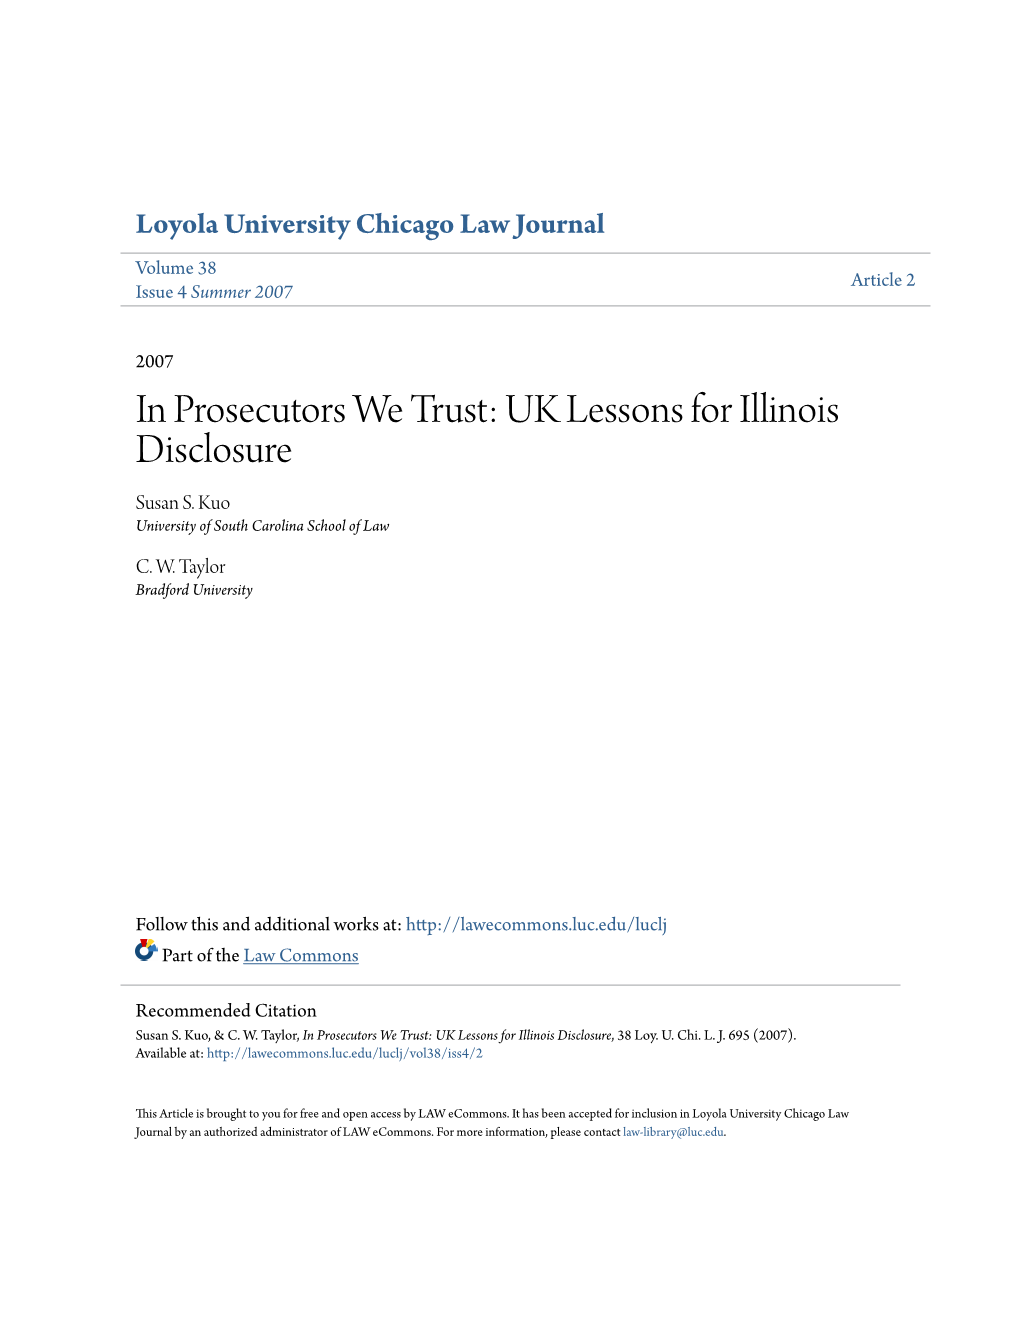 In Prosecutors We Trust: UK Lessons for Illinois Disclosure Susan S